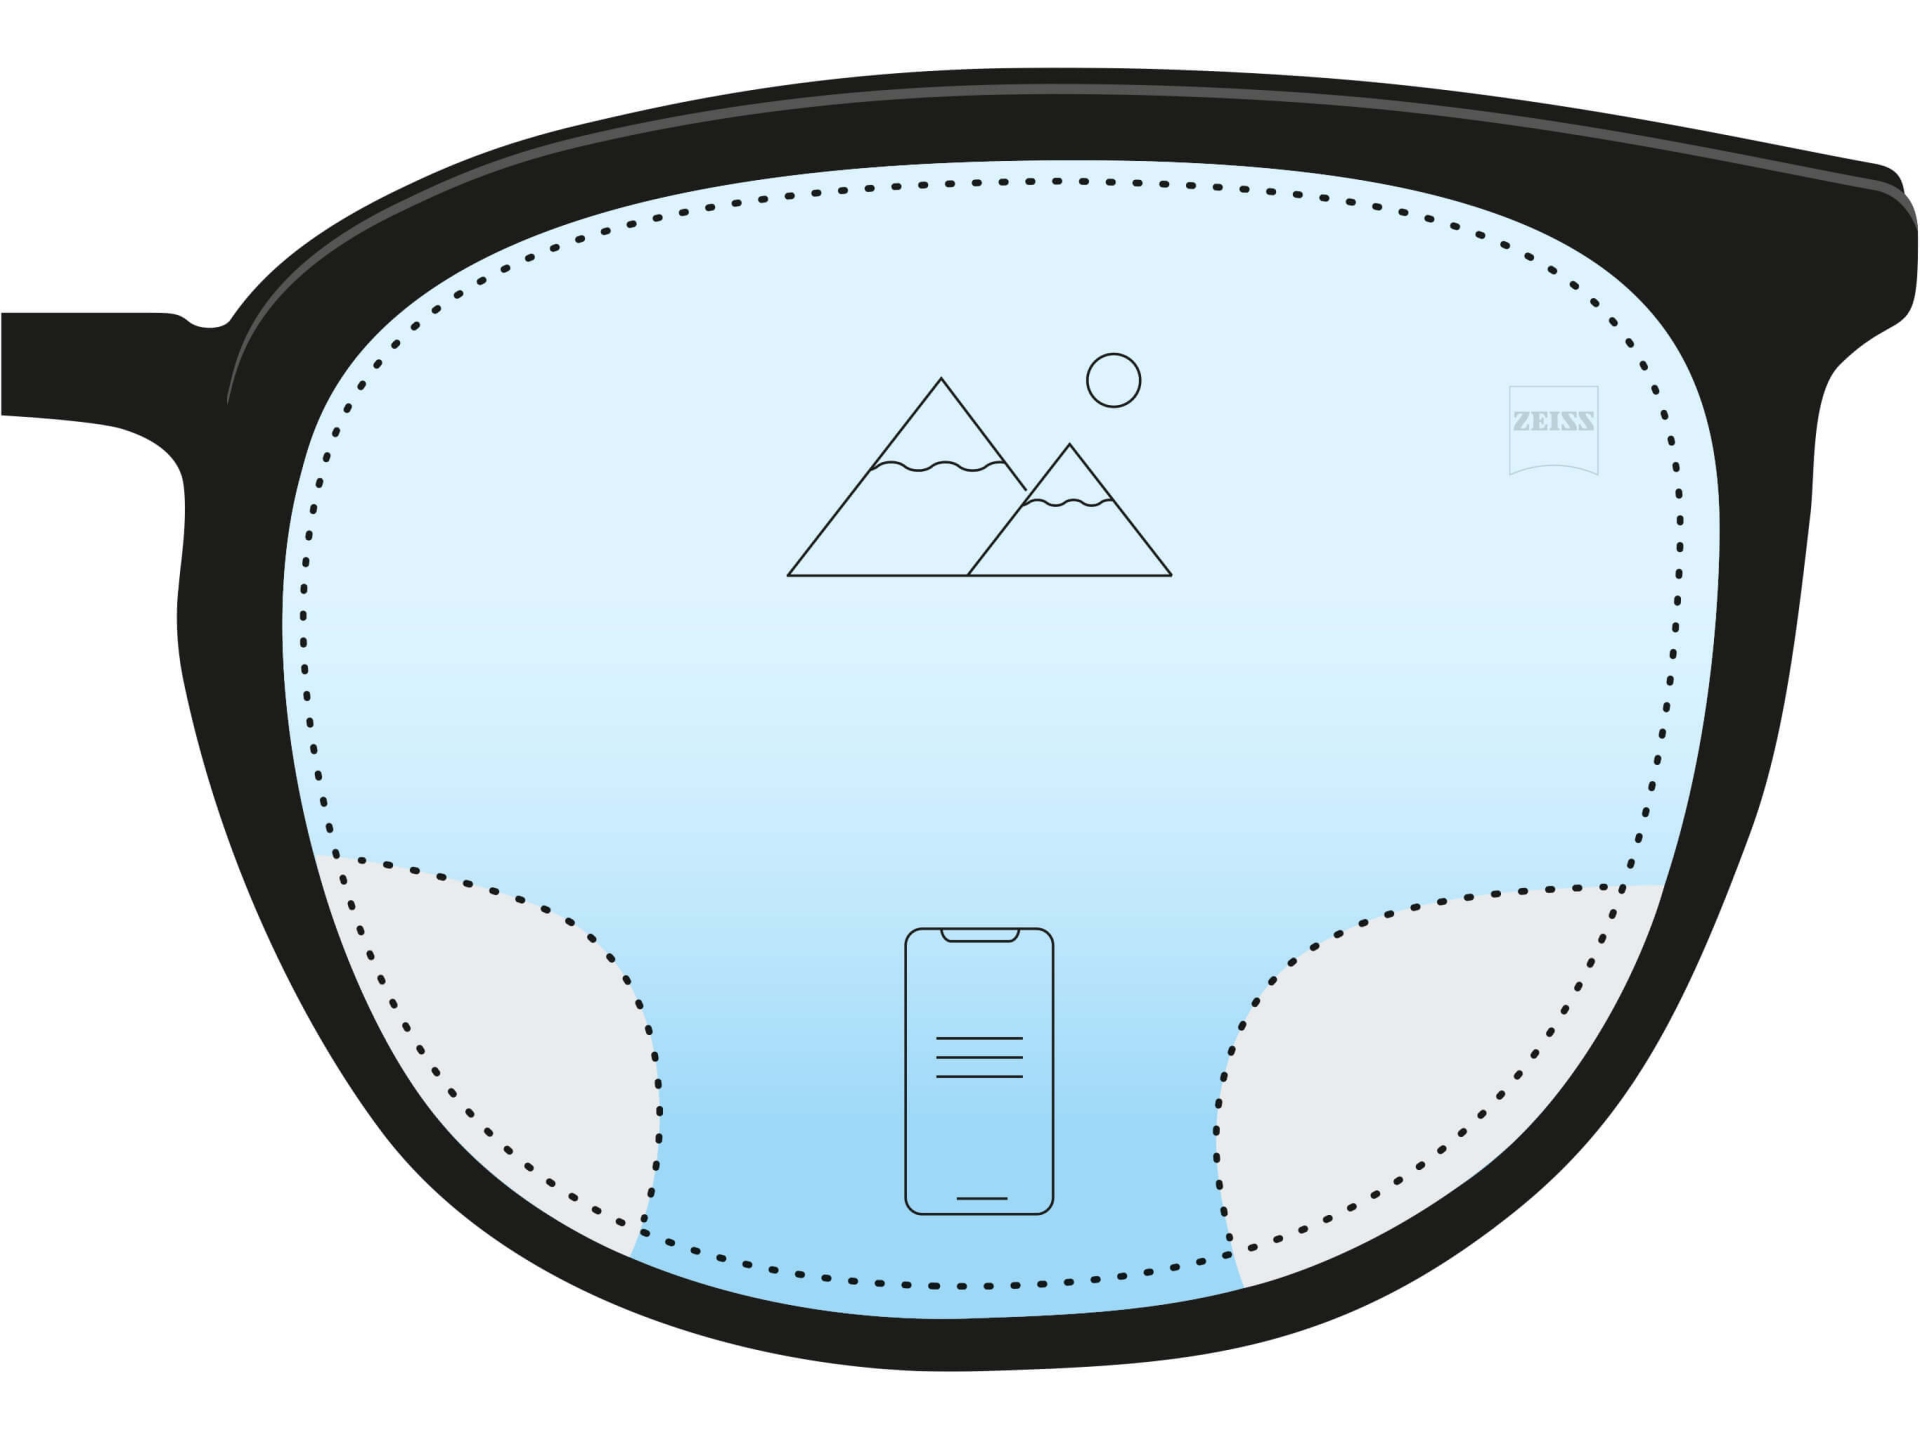 An illustration of an anti-fatigue lens. Two icons and a colour gradient from dark blue at the bottom to light blue at the top indicate that the biggest area of the lens has a distance prescription, but that there is a small area at the bottom that helps with close up vision.